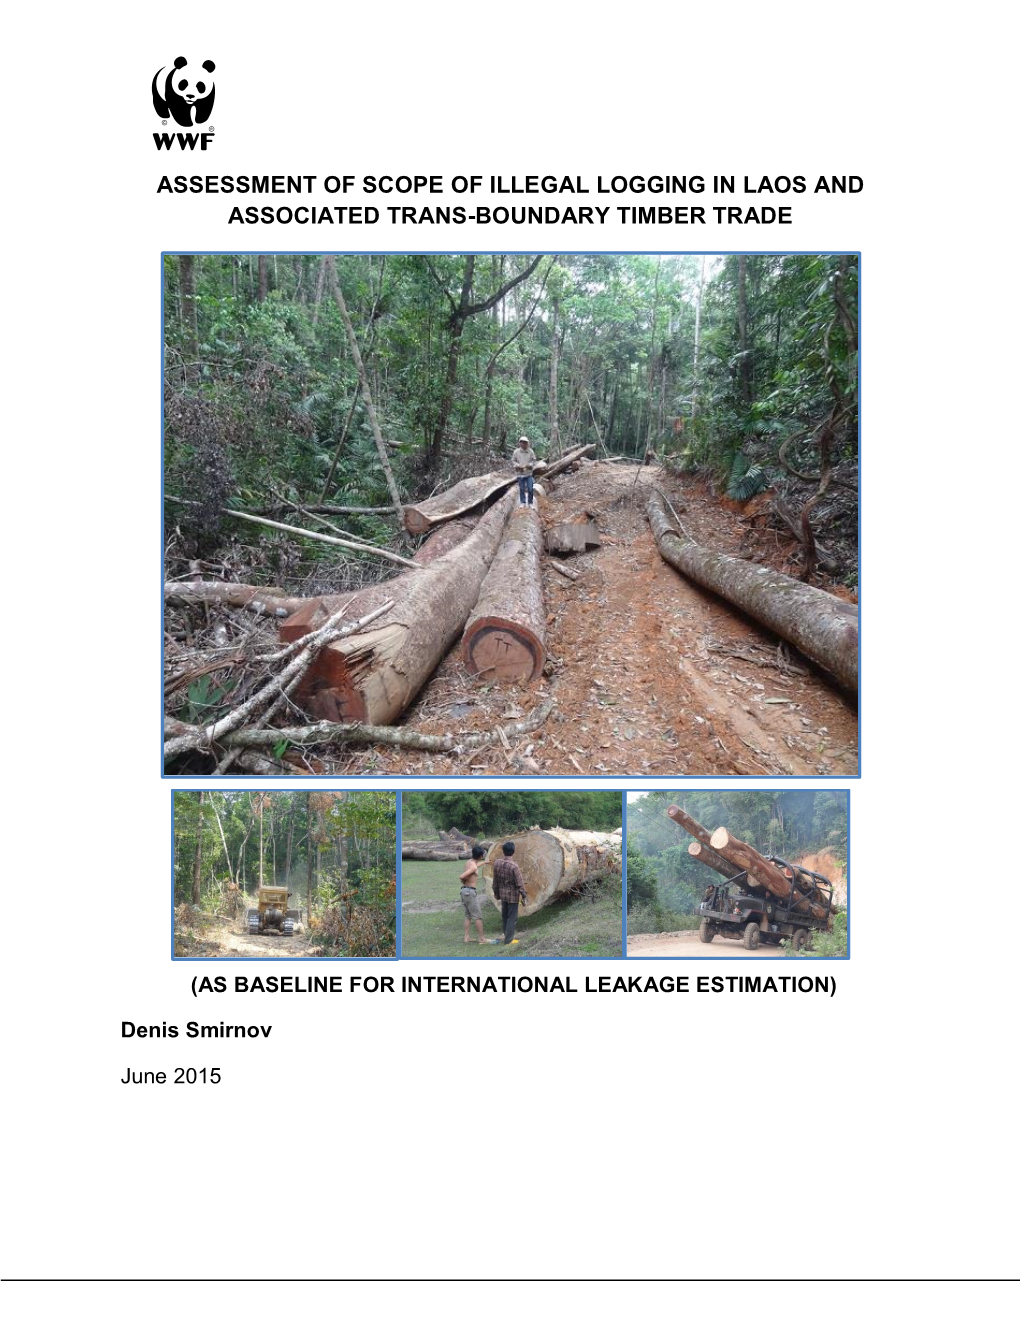 Assessment of Scope of Illegal Logging in Laos and Associated Trans-Boundary Timber Trade